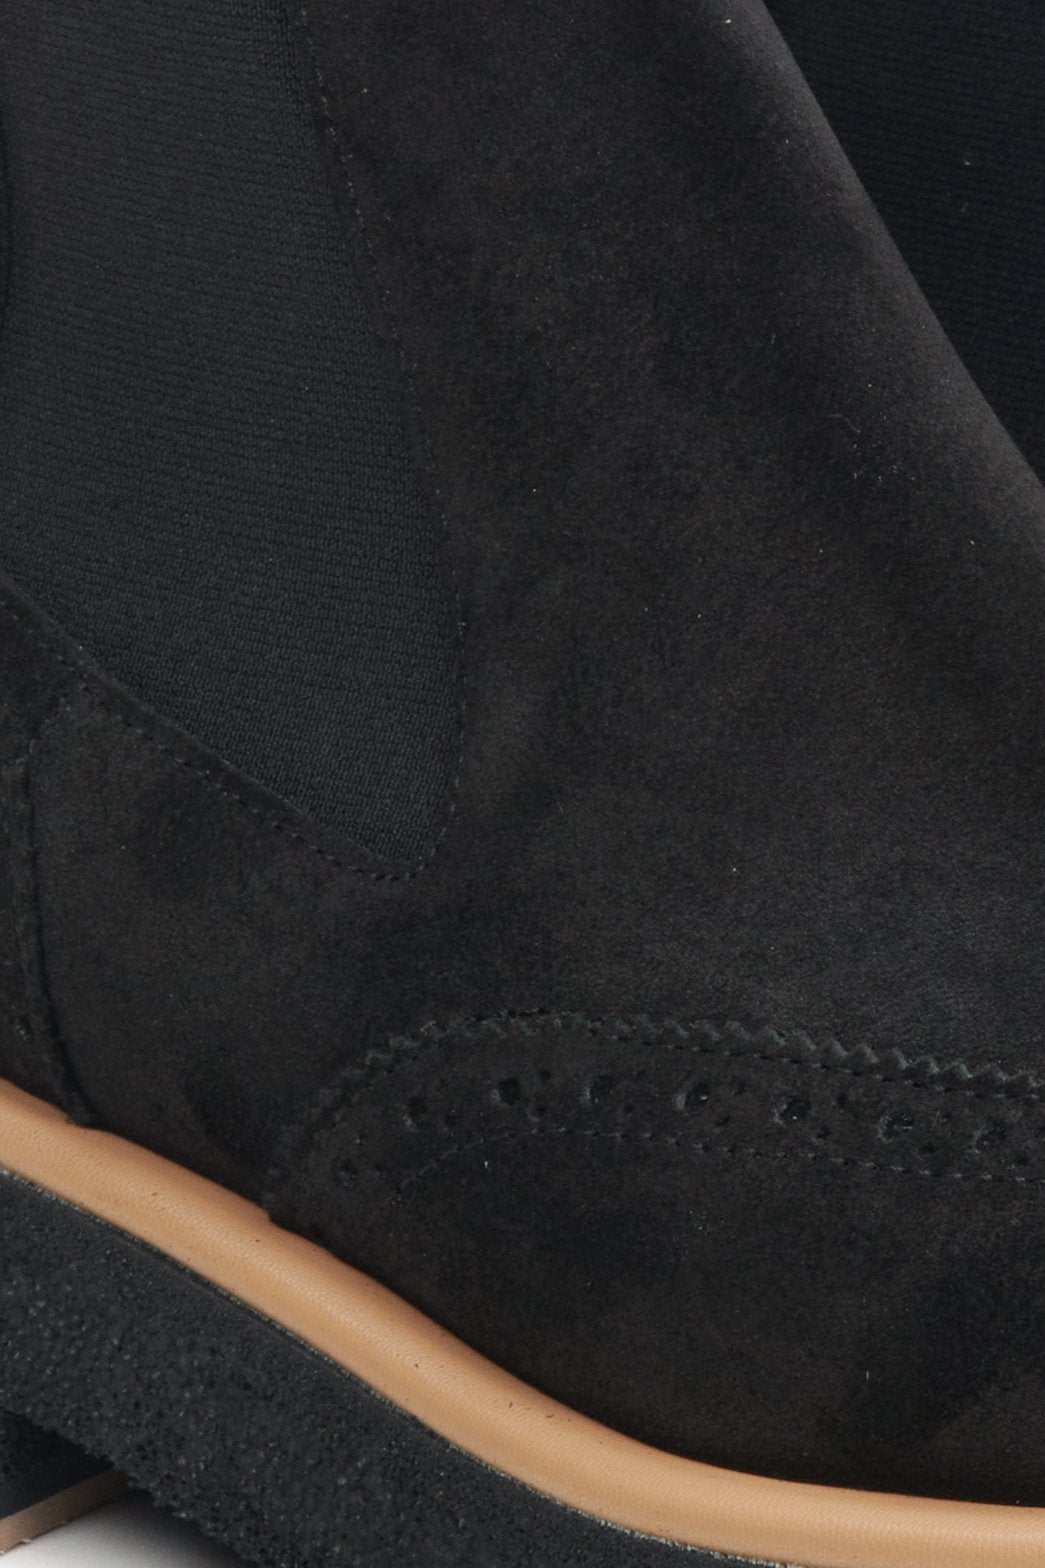 Women's black suede ankle boots by Estro - close-up on the details.